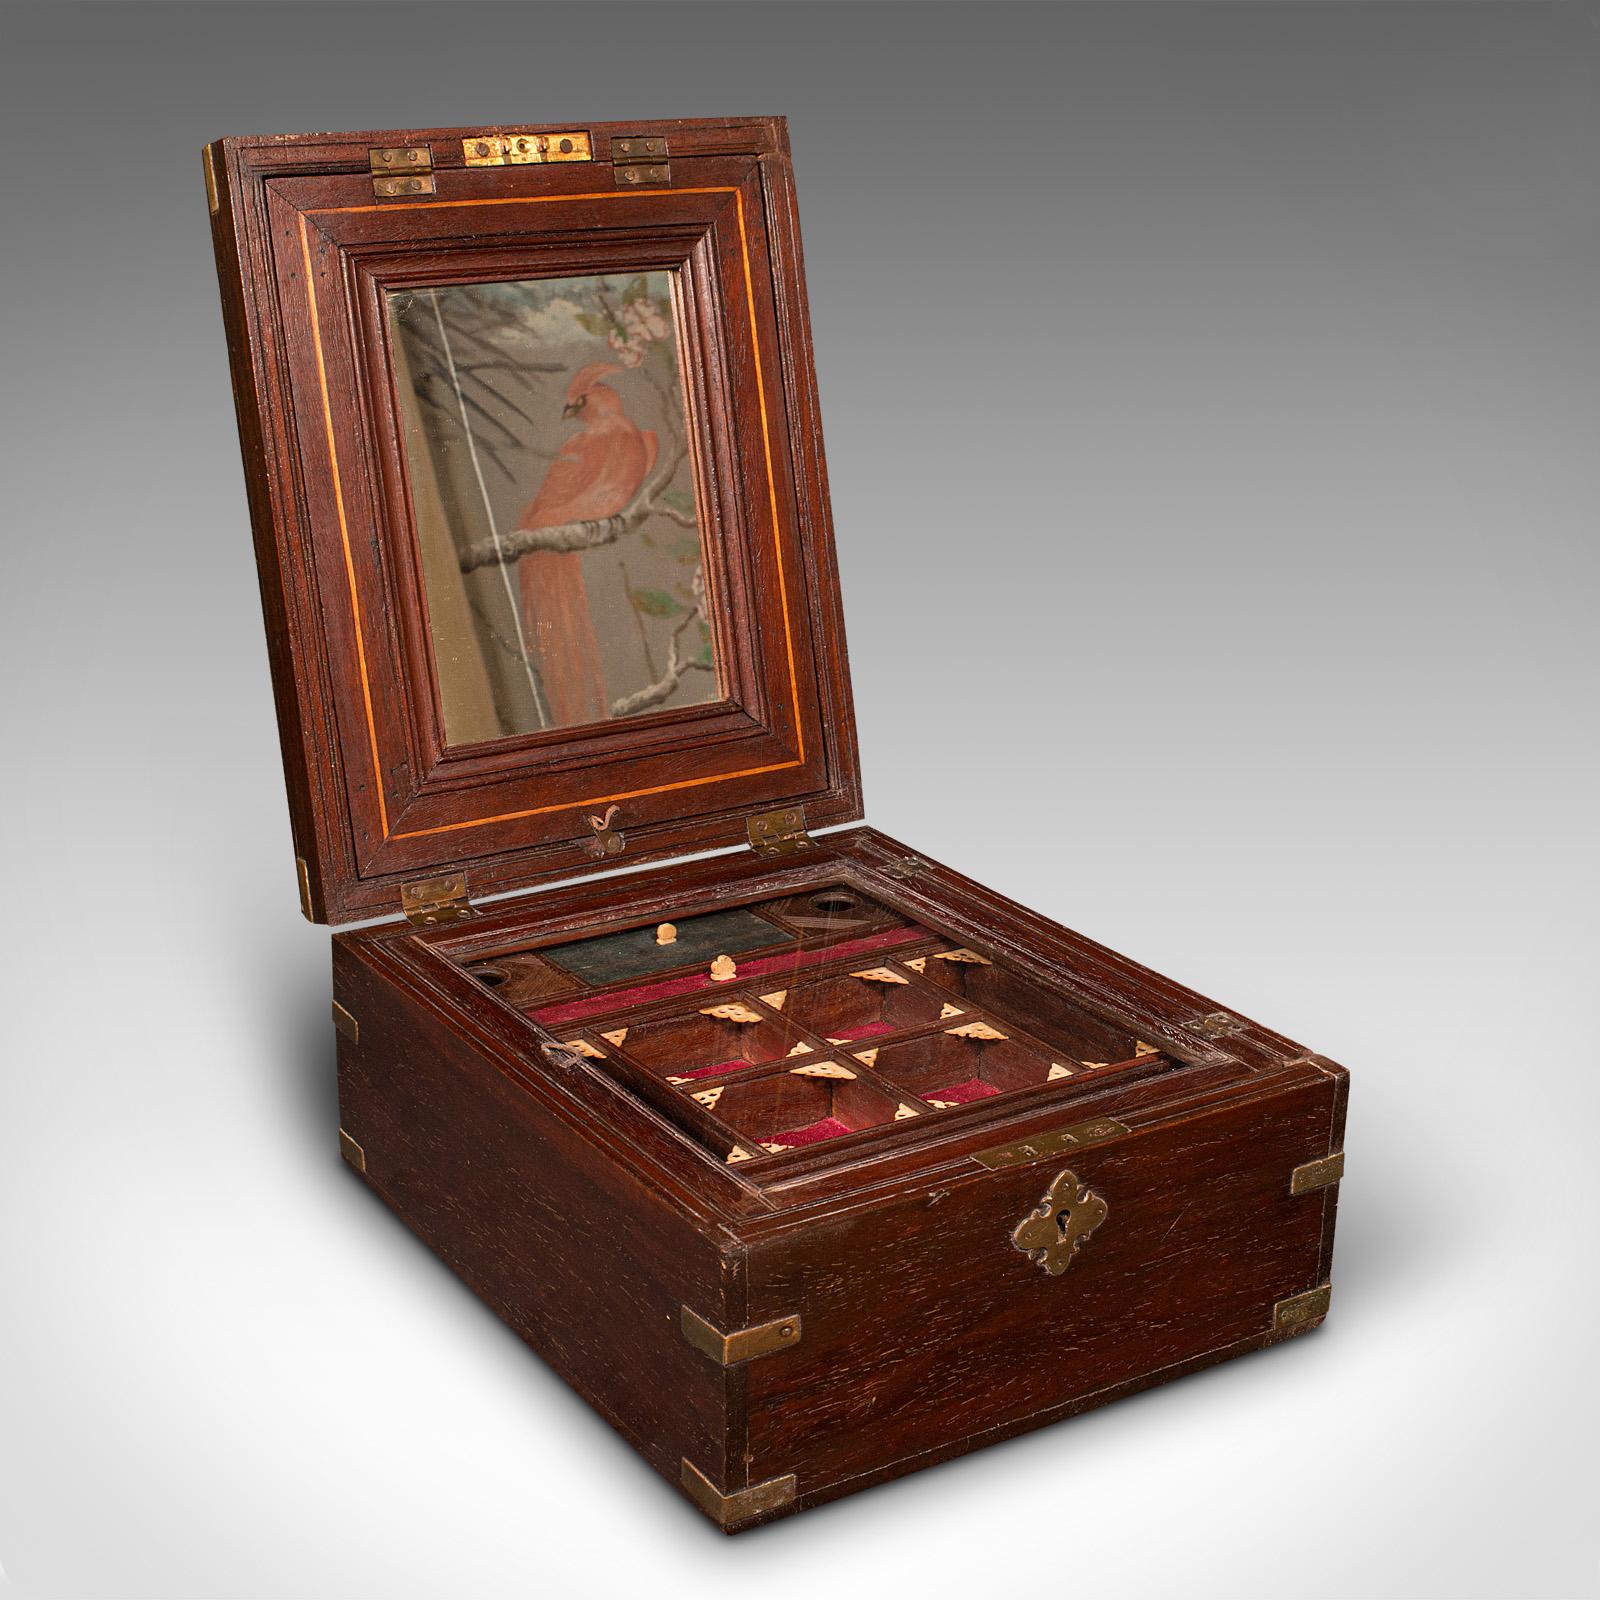 This is an antique gentleman's travelling box. An Anglo-Indian, teak and brass bound correspondence case, dating to the Victorian period, circa 1880.

Delightful colonial interest, perfect for the golden age of luxury travel.
Displays a desirable